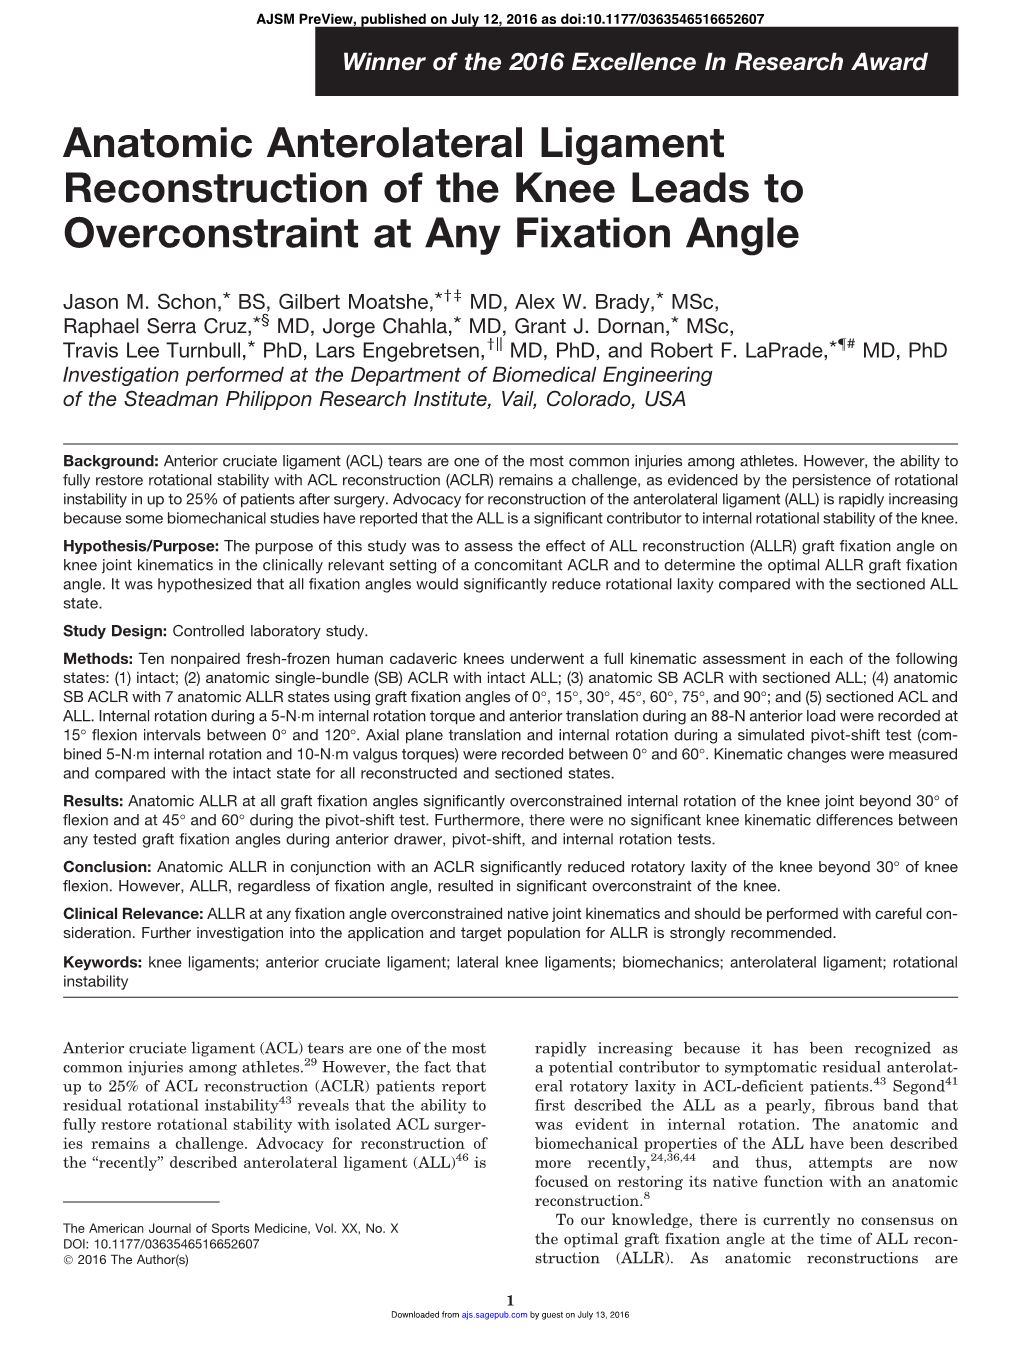 Anatomic Anterolateral Ligament Reconstruction of the Knee Leads to Overconstraint at Any Fixation Angle